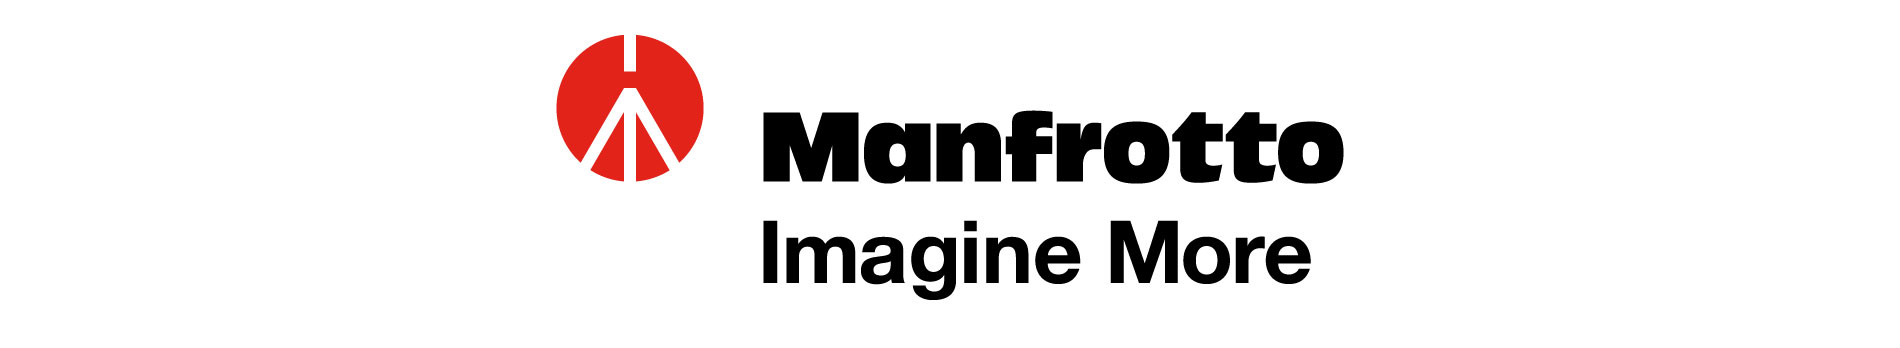 manfrotto-top